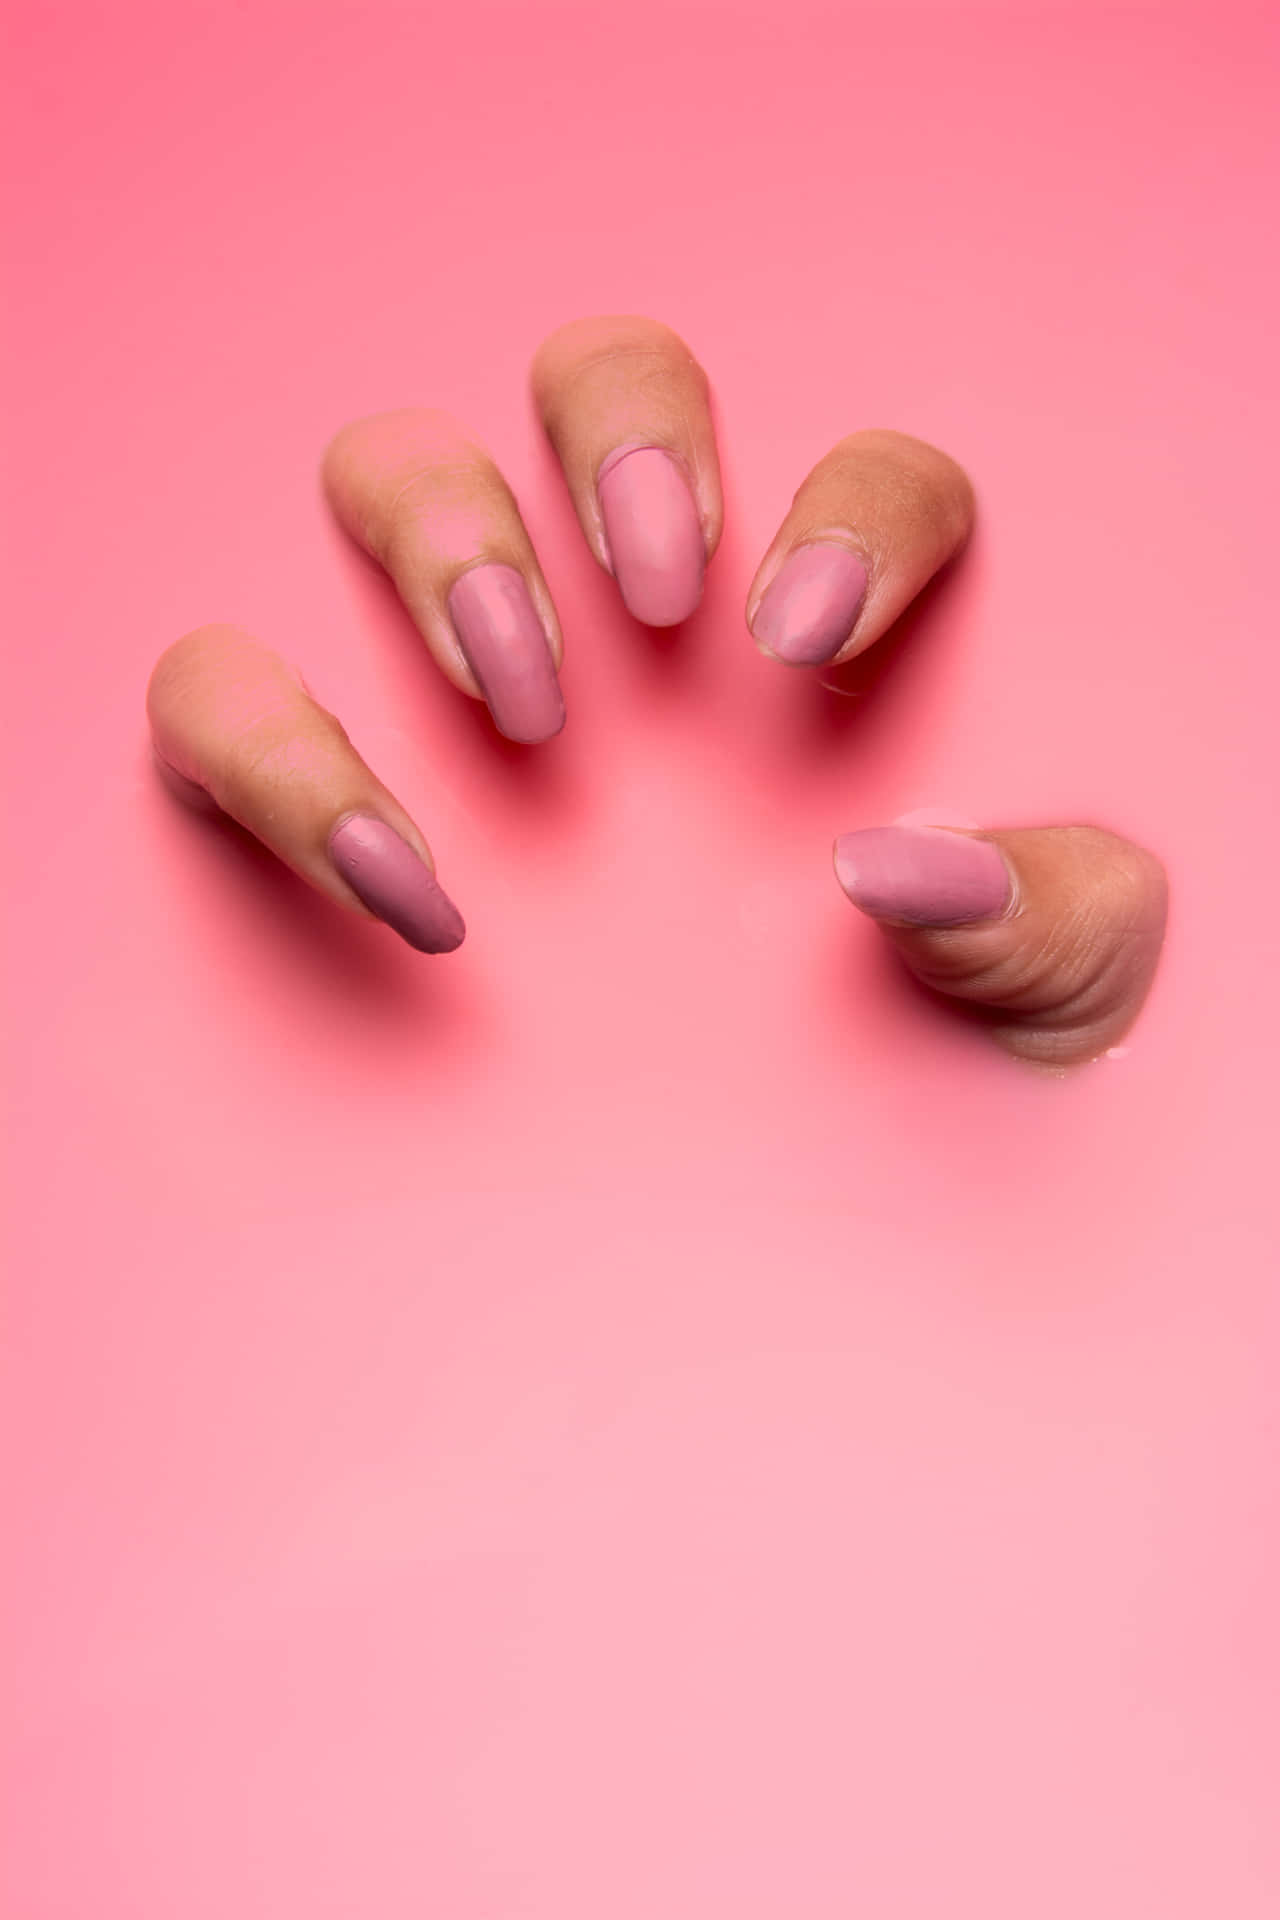 A Woman's Pink Nails Are Shown On A Pink Background Wallpaper